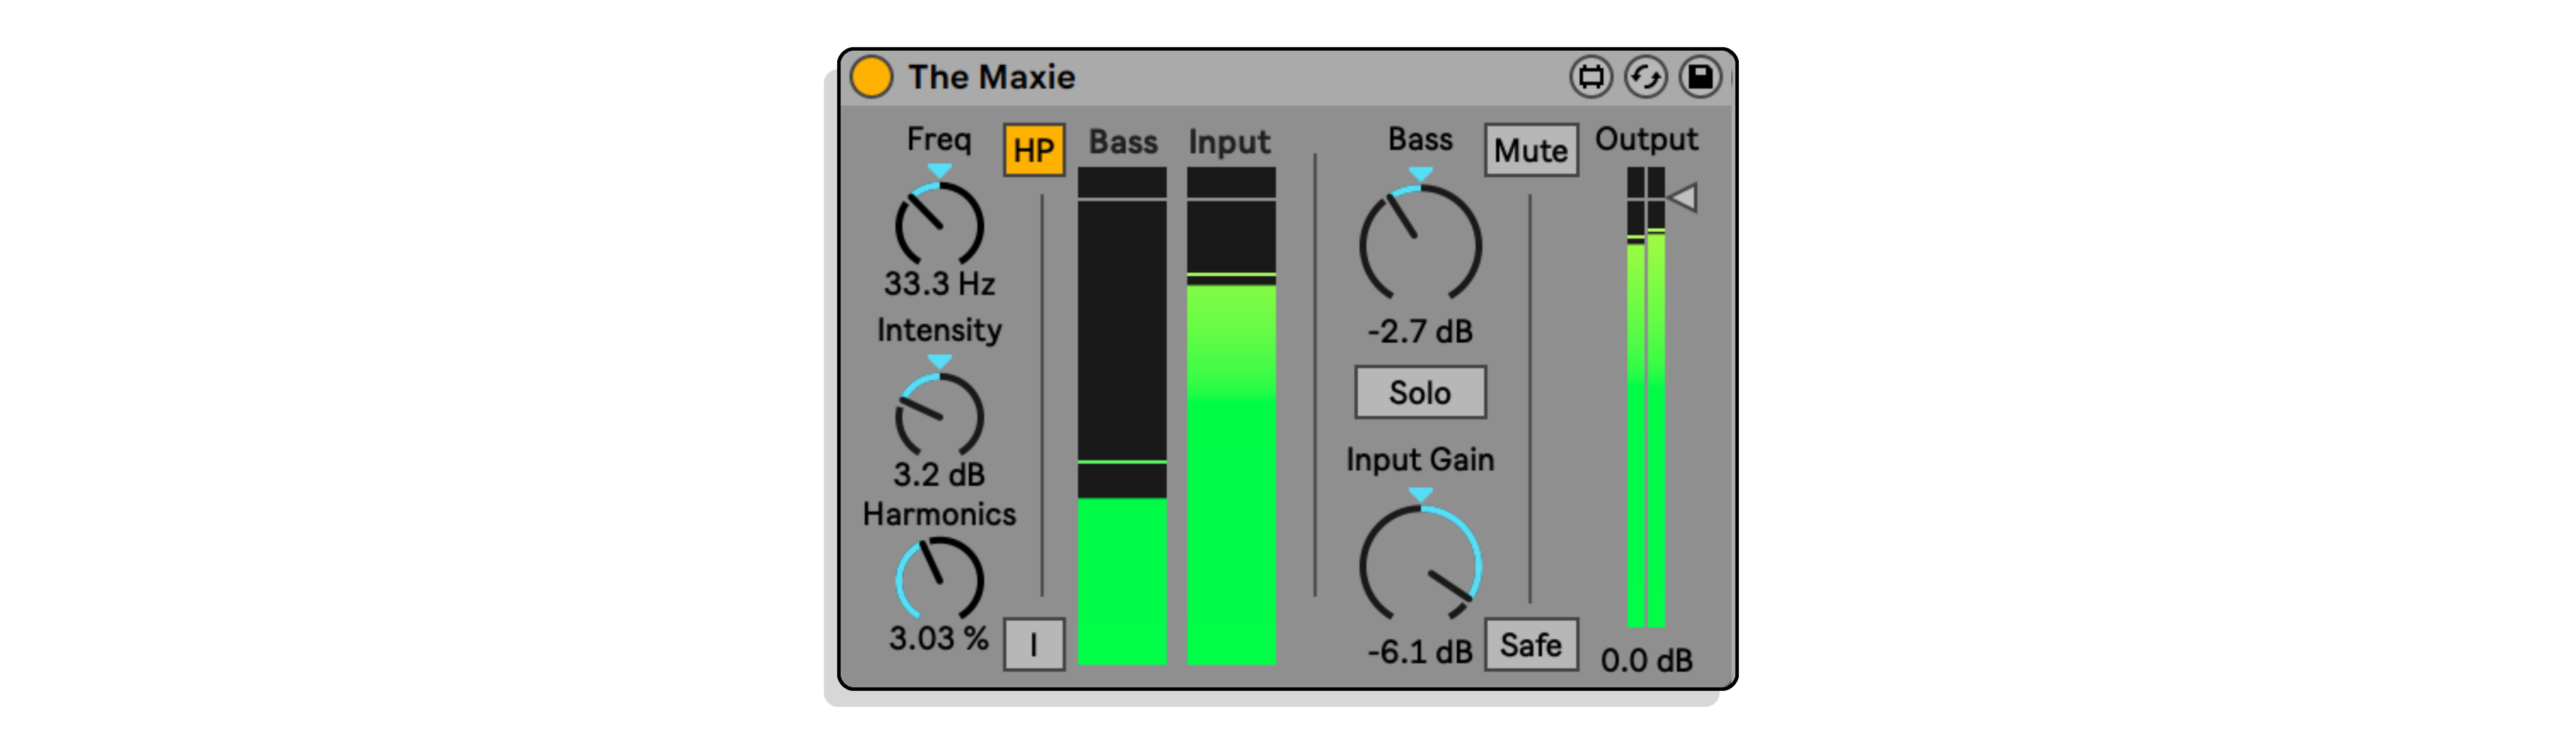 The Maxie MaxforLive Device for Ableton Live by White Horse